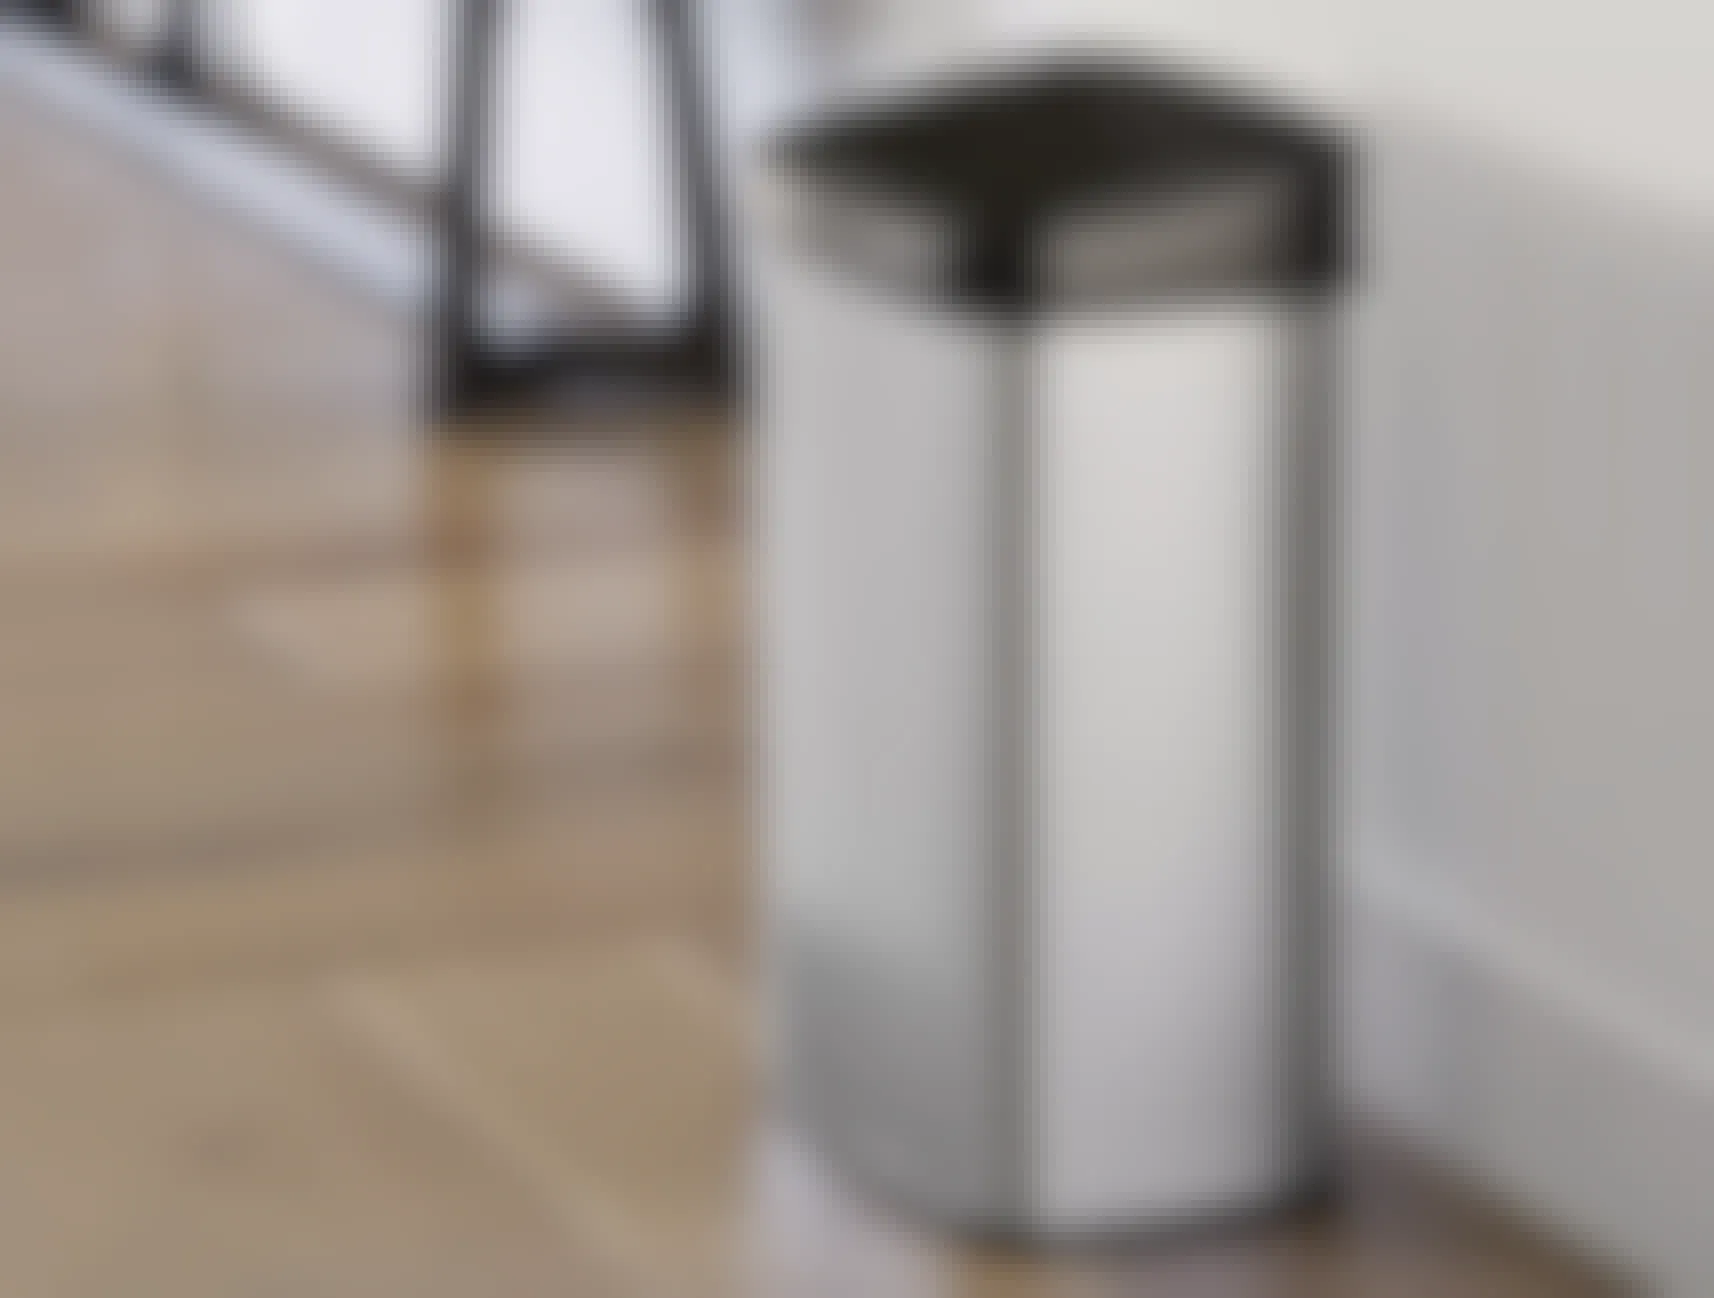 A Stainless Steel 13.2 Gallon Motion Sensor Trash Can from Wayfair staged in a kitchen.